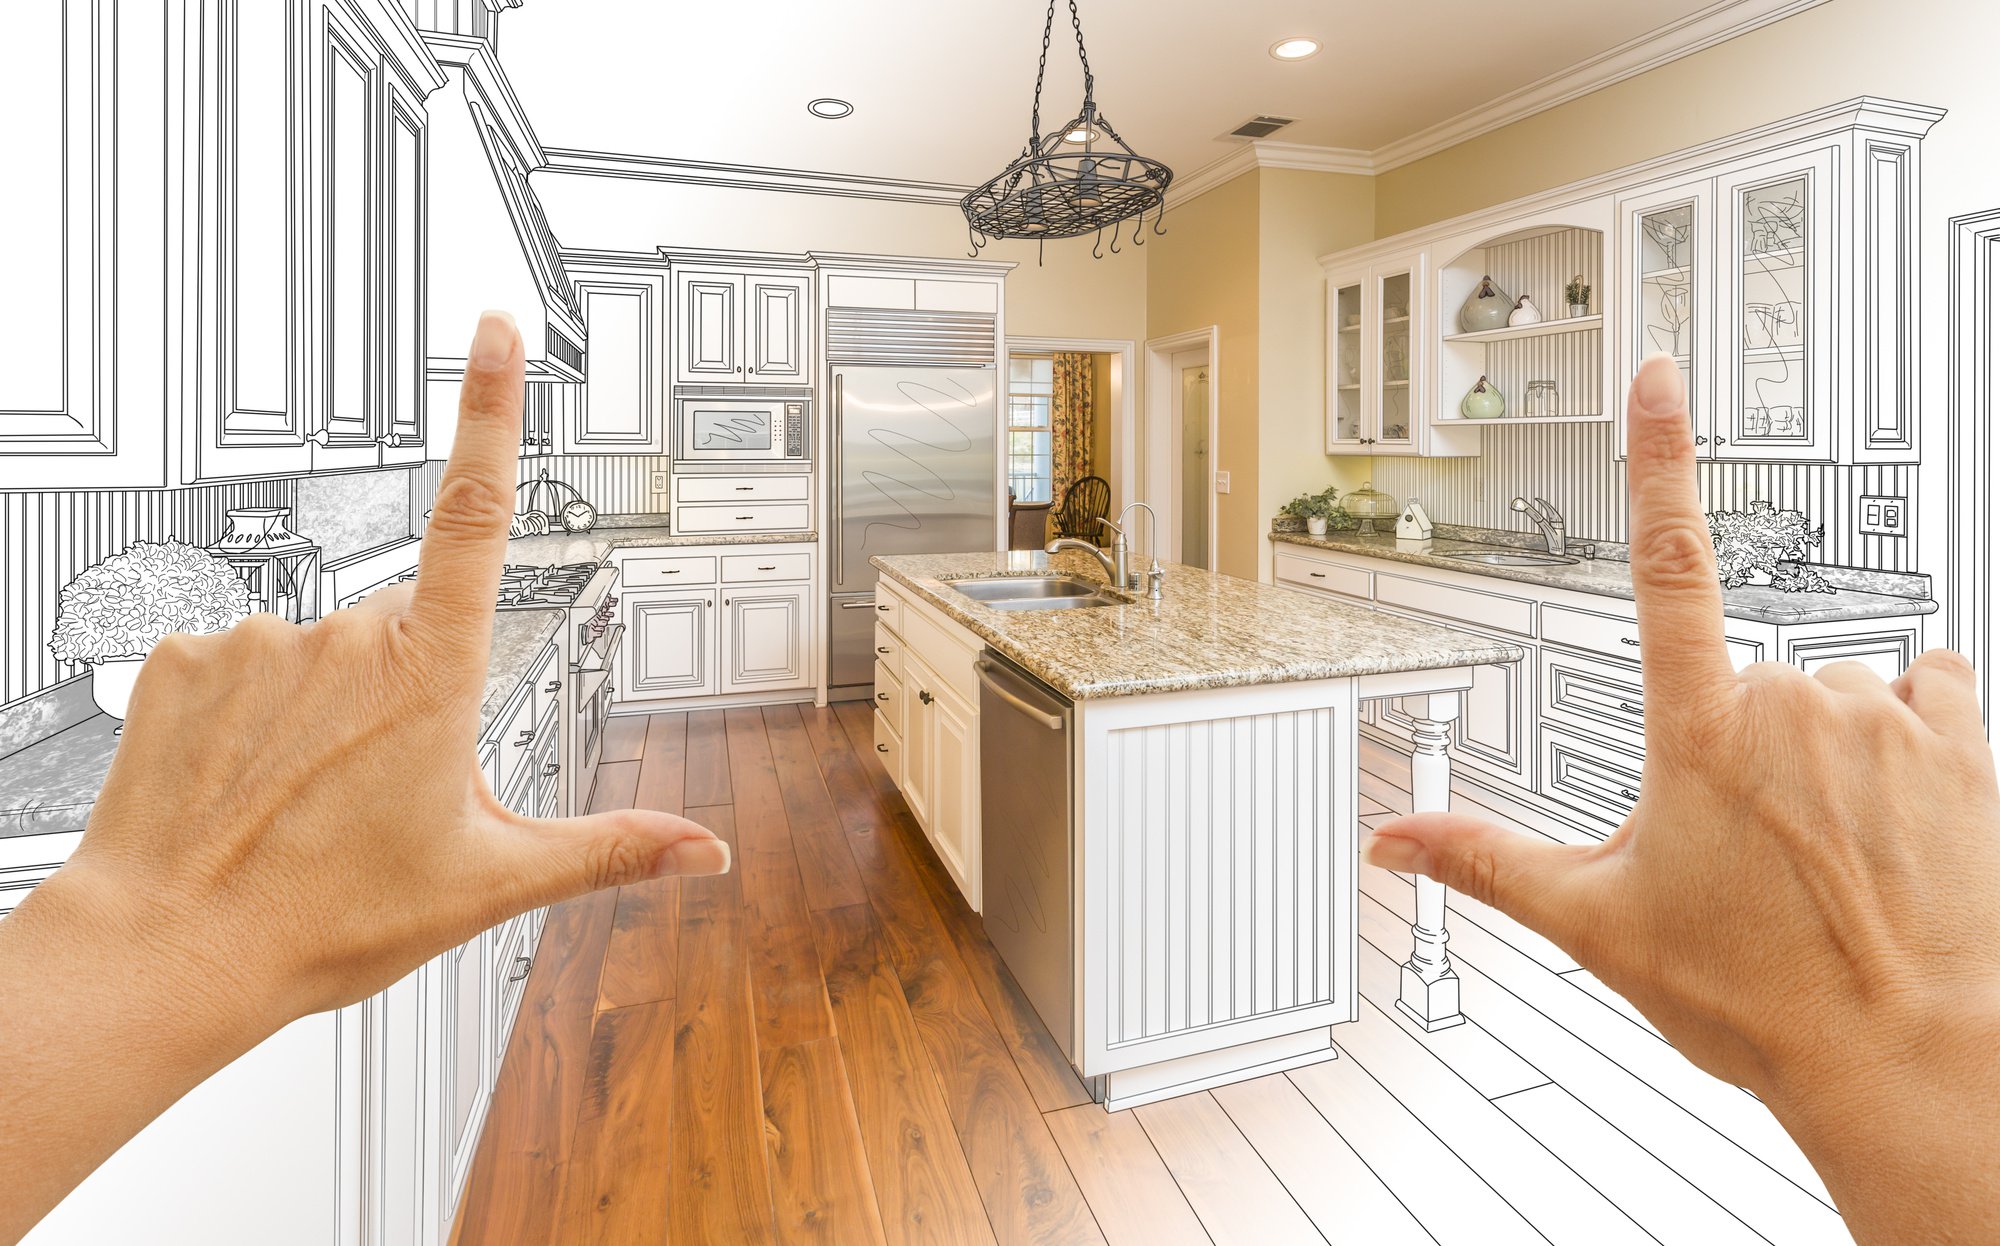 remodeling kitchen things renovations yourself ask should before billion financially americans homeowners though cost projects over